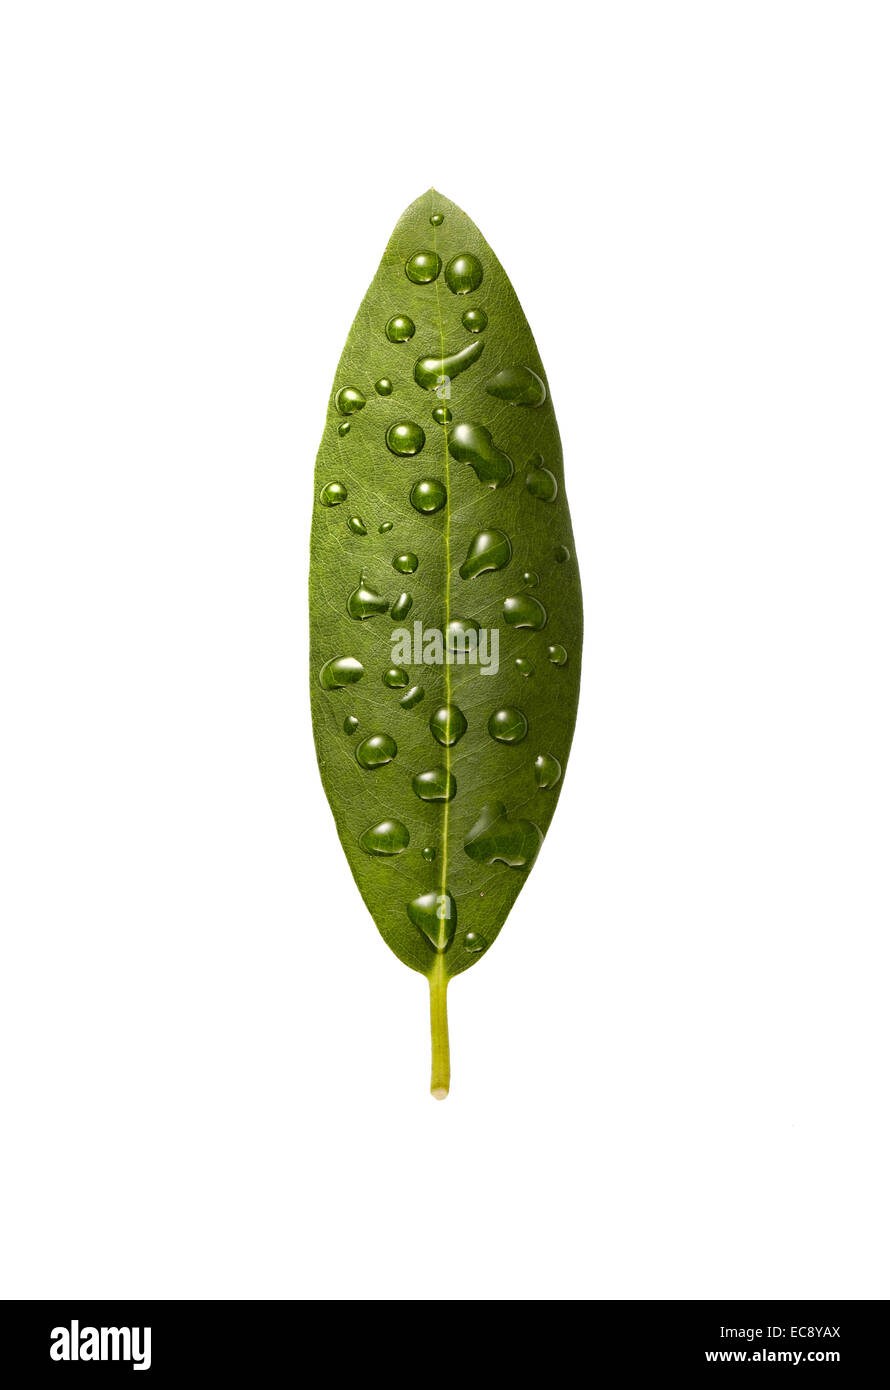 Rhododendron leaf with water droplets Stock Photo